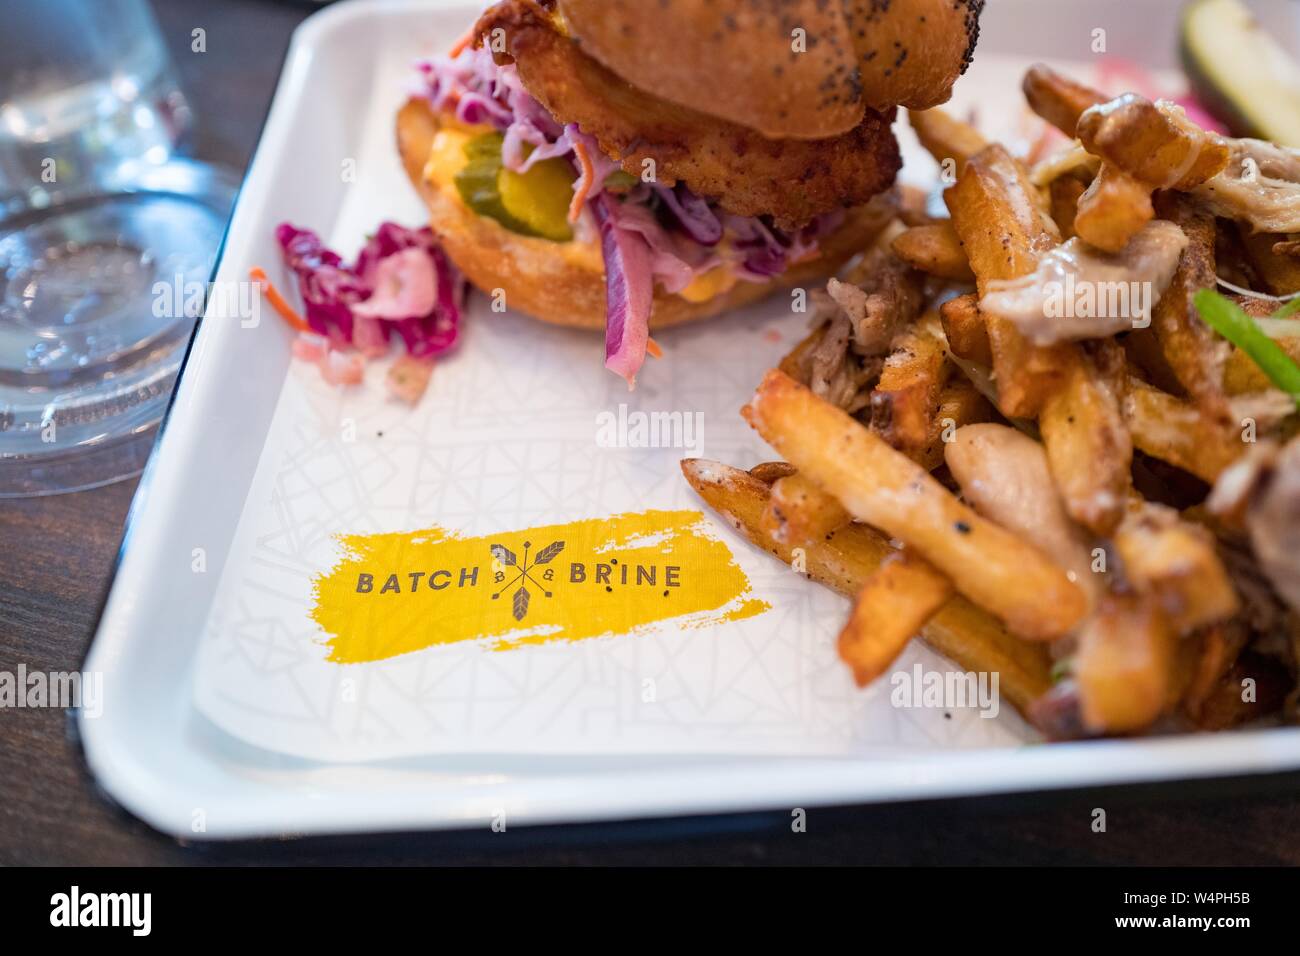 Close-up of logo for Batch and Brine upscale sandwich restaurant on a plate with a fried chicken sandwich, Lafayette, California, September 10, 2018. () Stock Photo